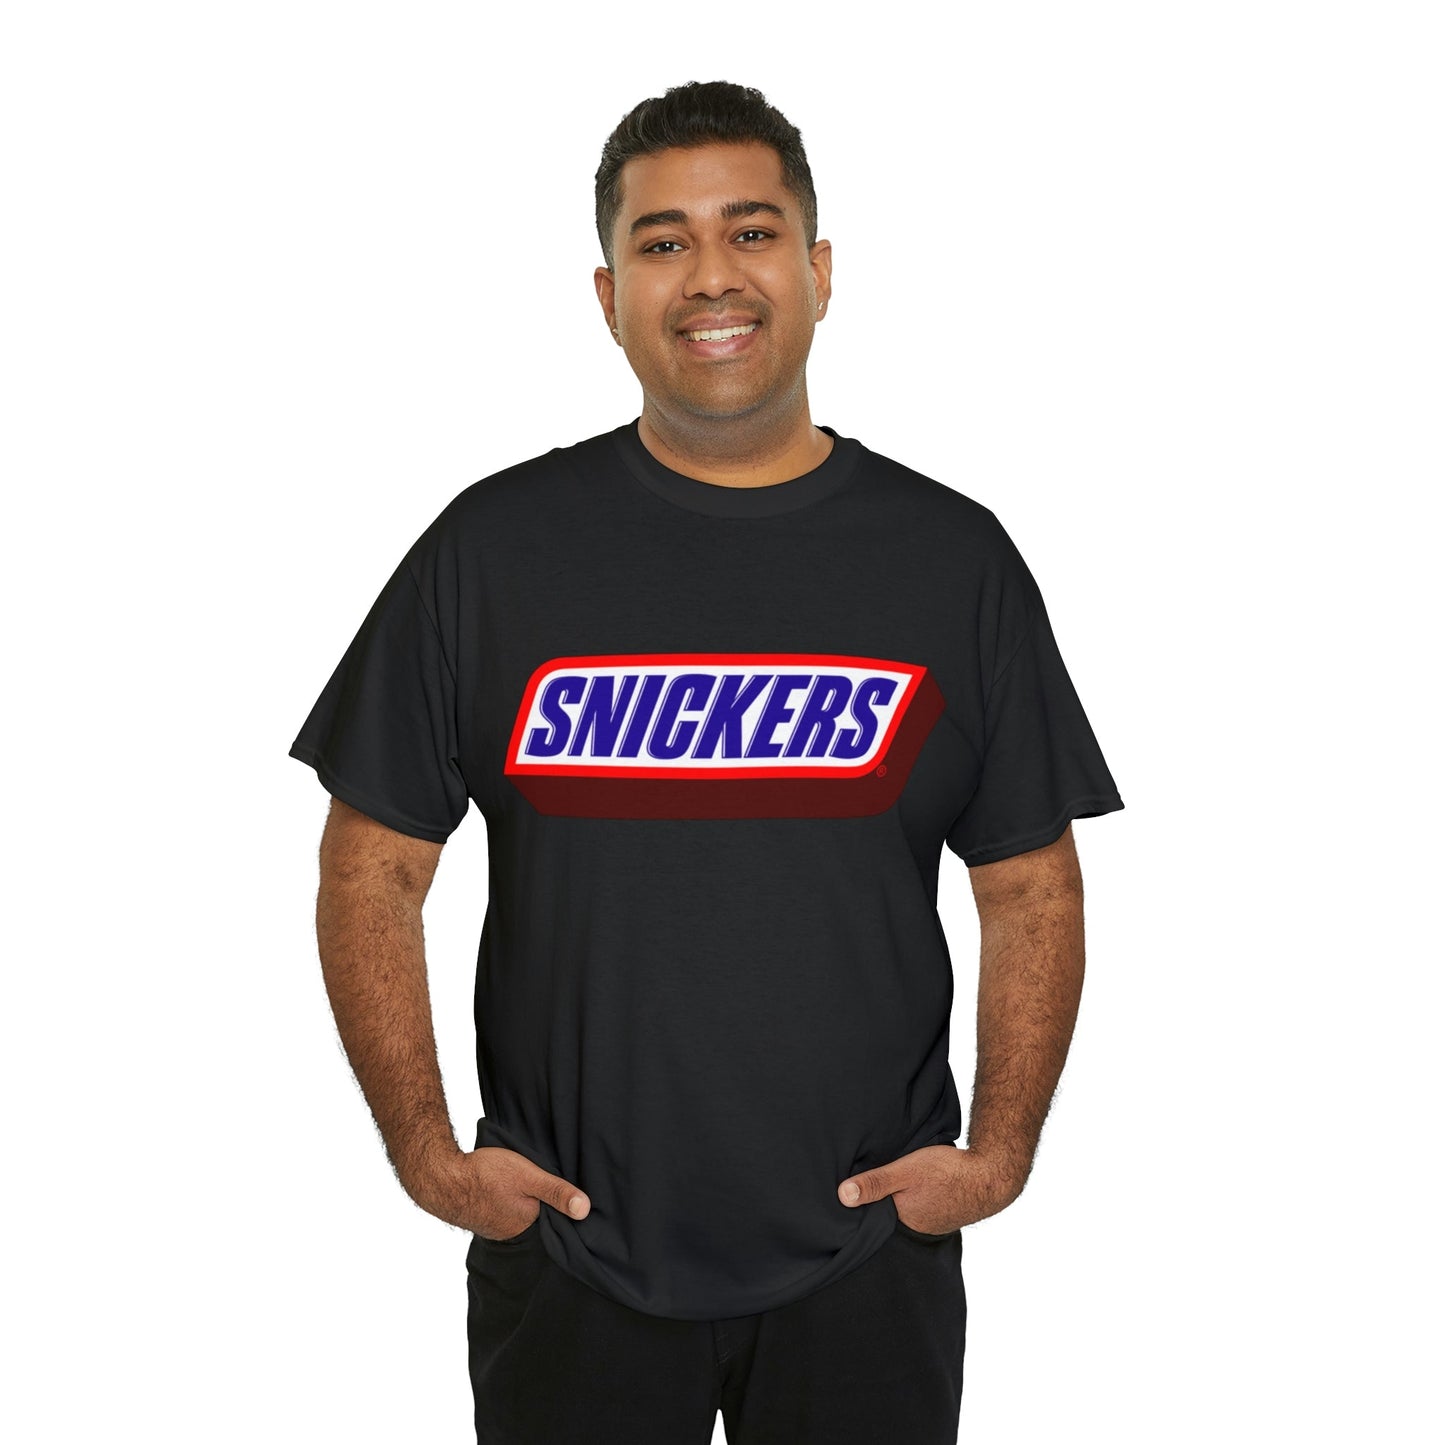 Snickers Candy Bar Logo T-Shirt - RetroTeeShop